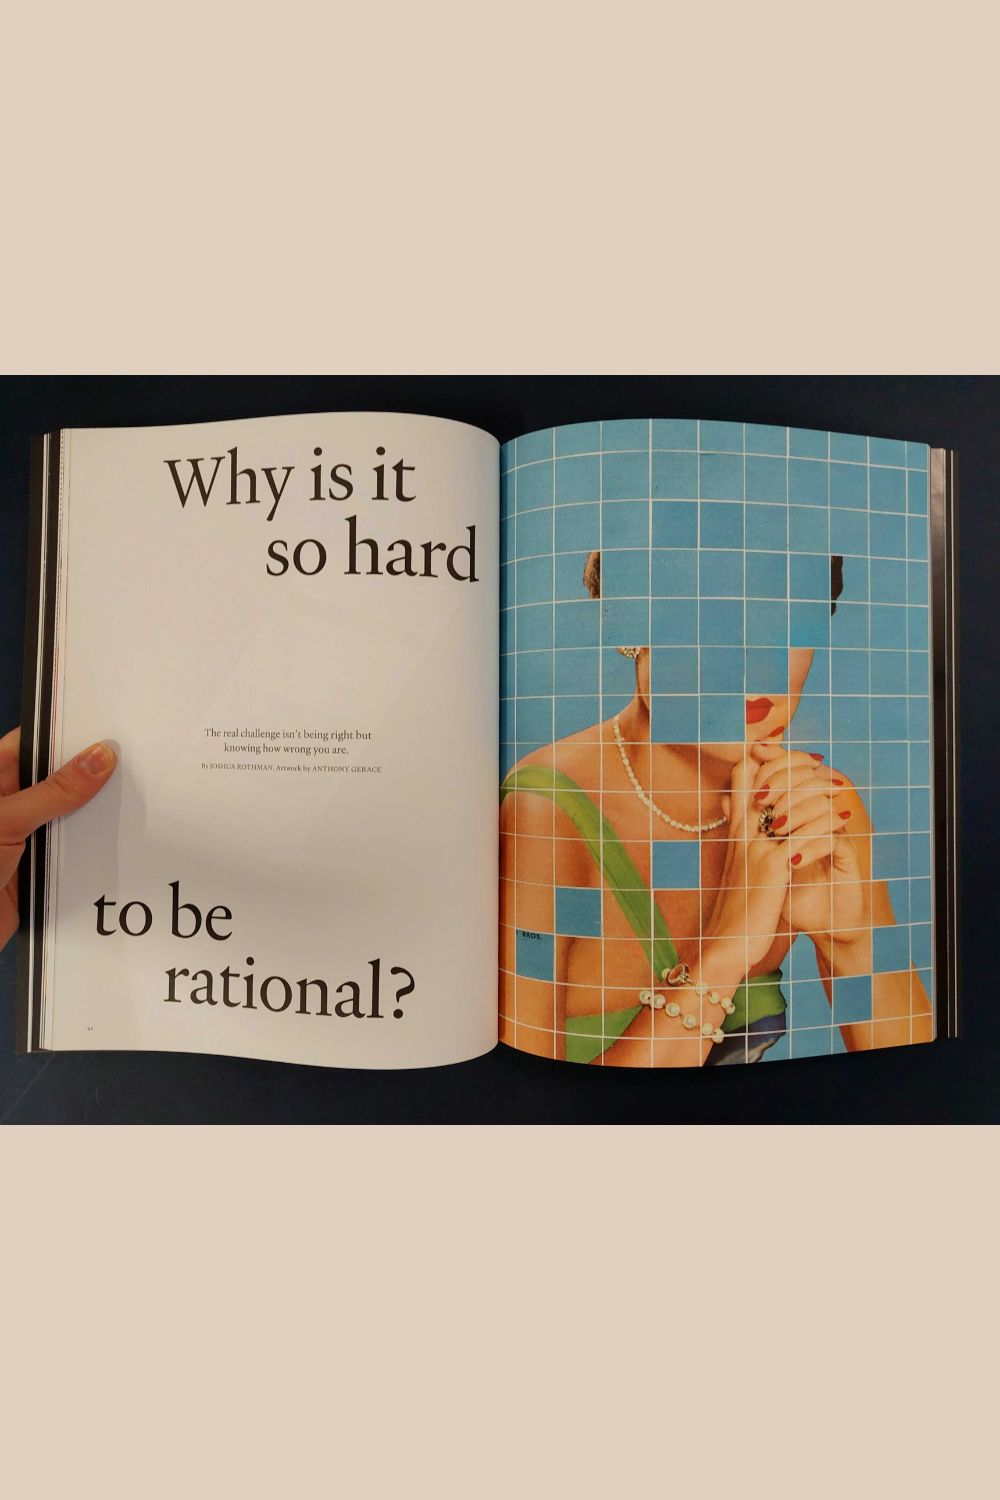 Talking about rationality, in The Beautiful Truth issue 1